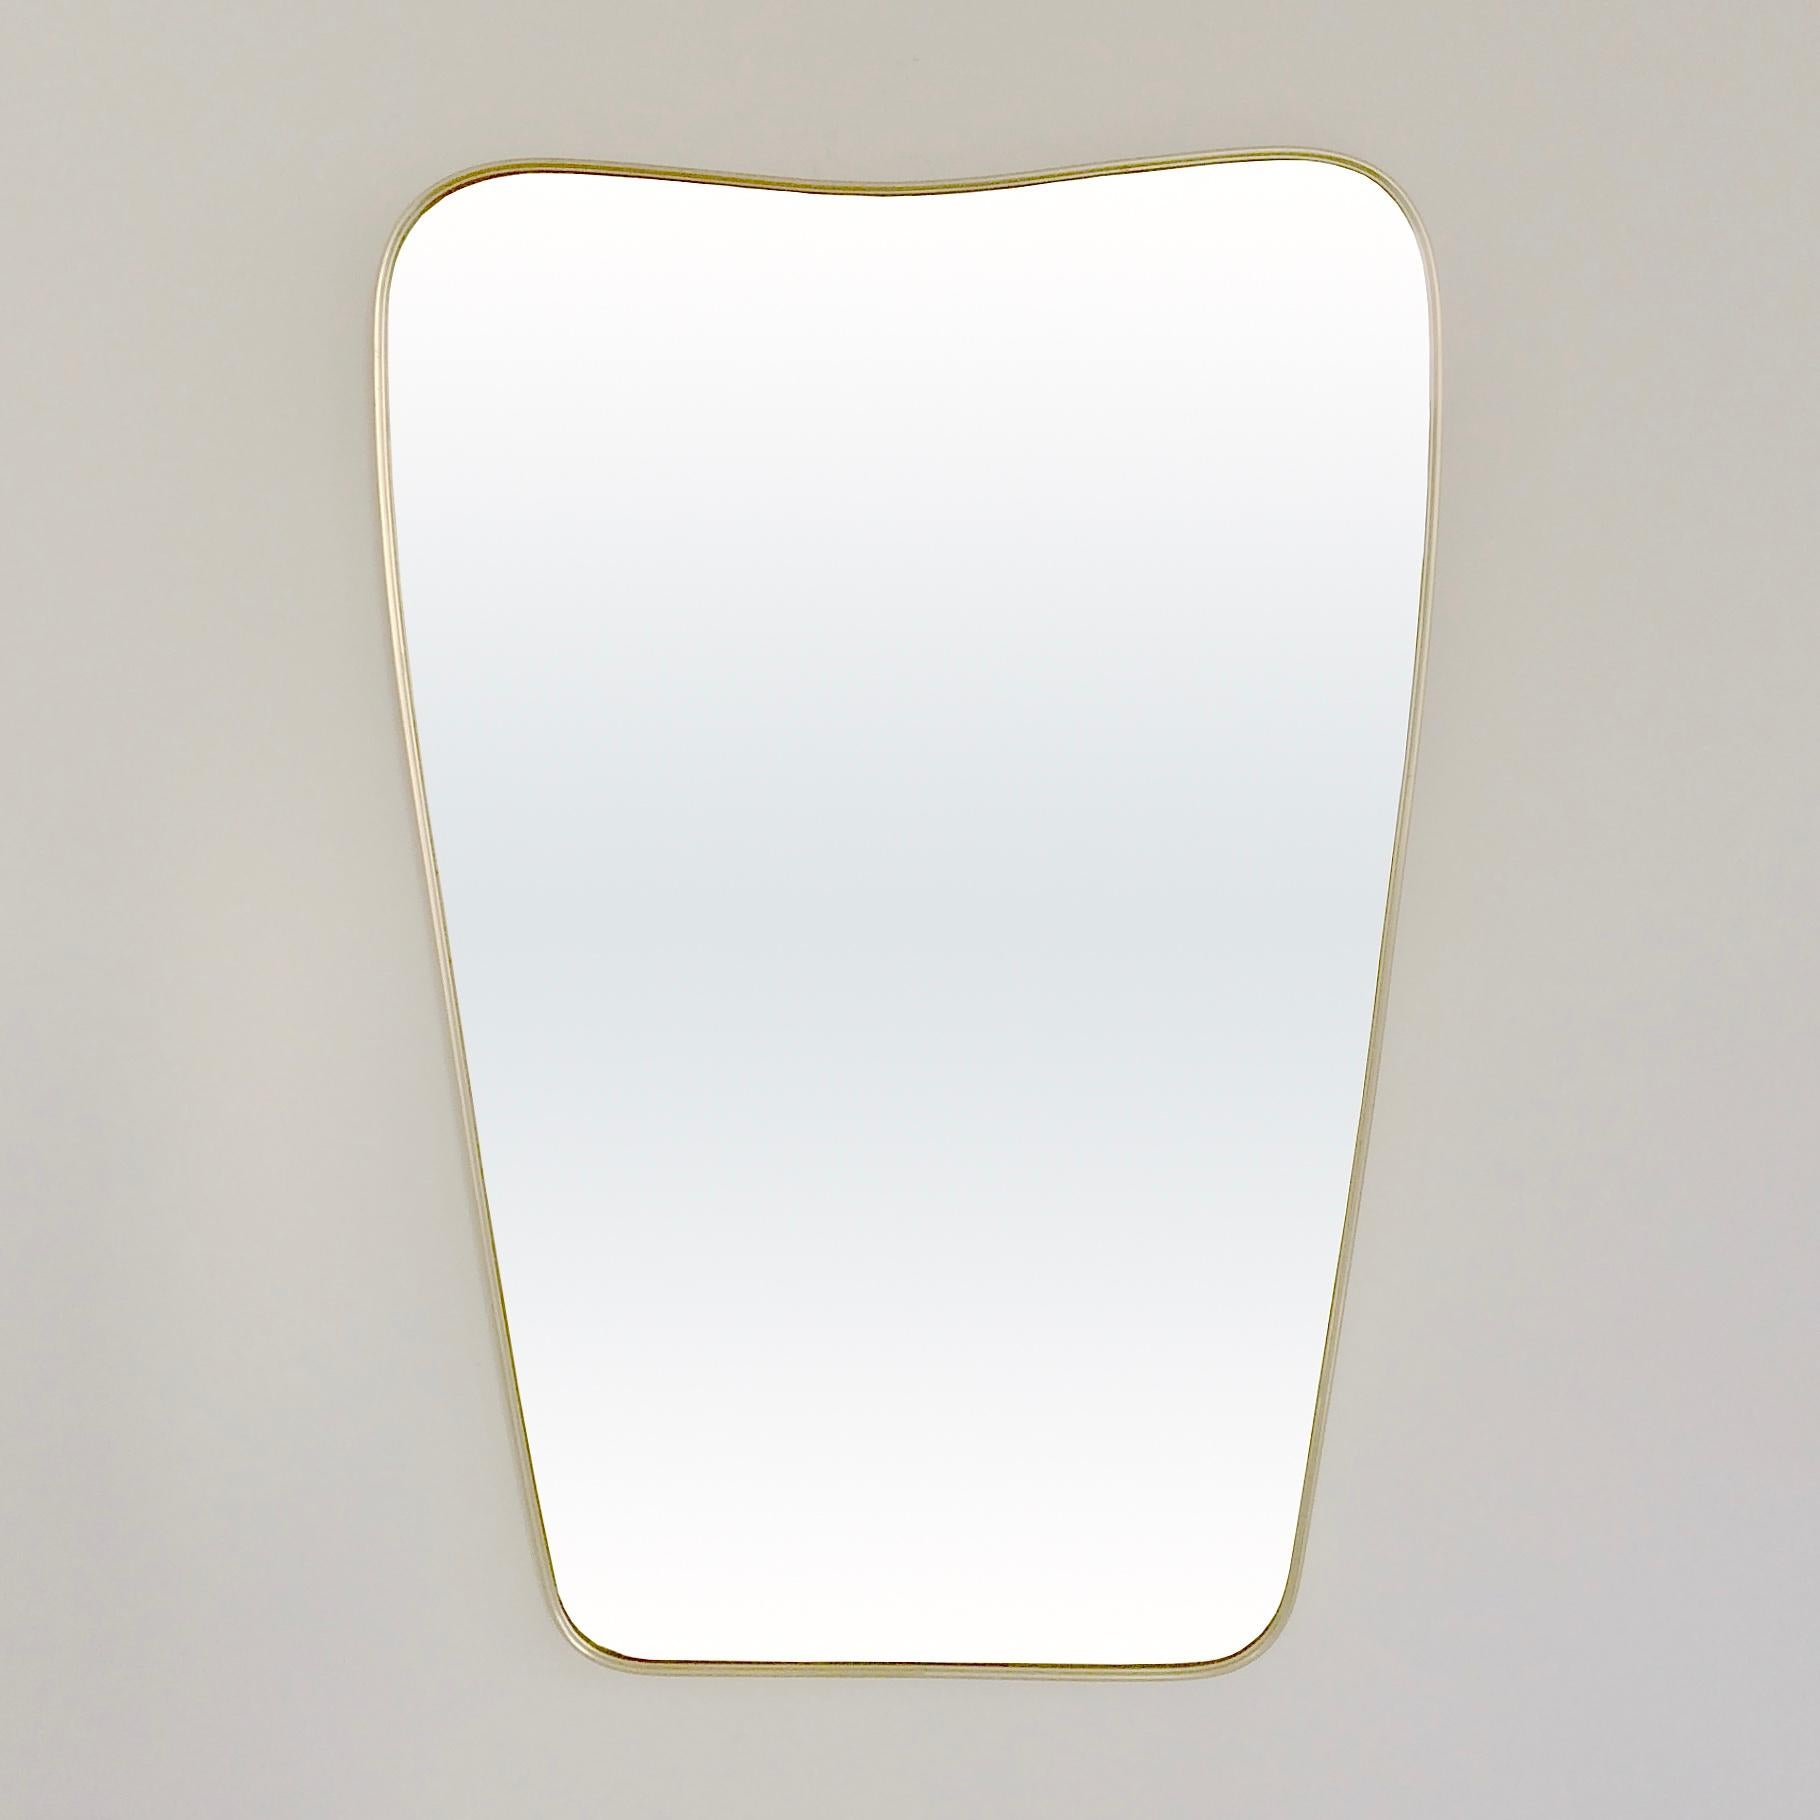 Gio Ponti large mirror, circa 1950, Italy.
Polished brass, mirror.
Dimensions: 96 cm H, 66 cm W, 3 cm D.
Rare item in is original condition.
All purchases are covered by our Buyer Protection Guarantee.
This item can be returned within 7 days of